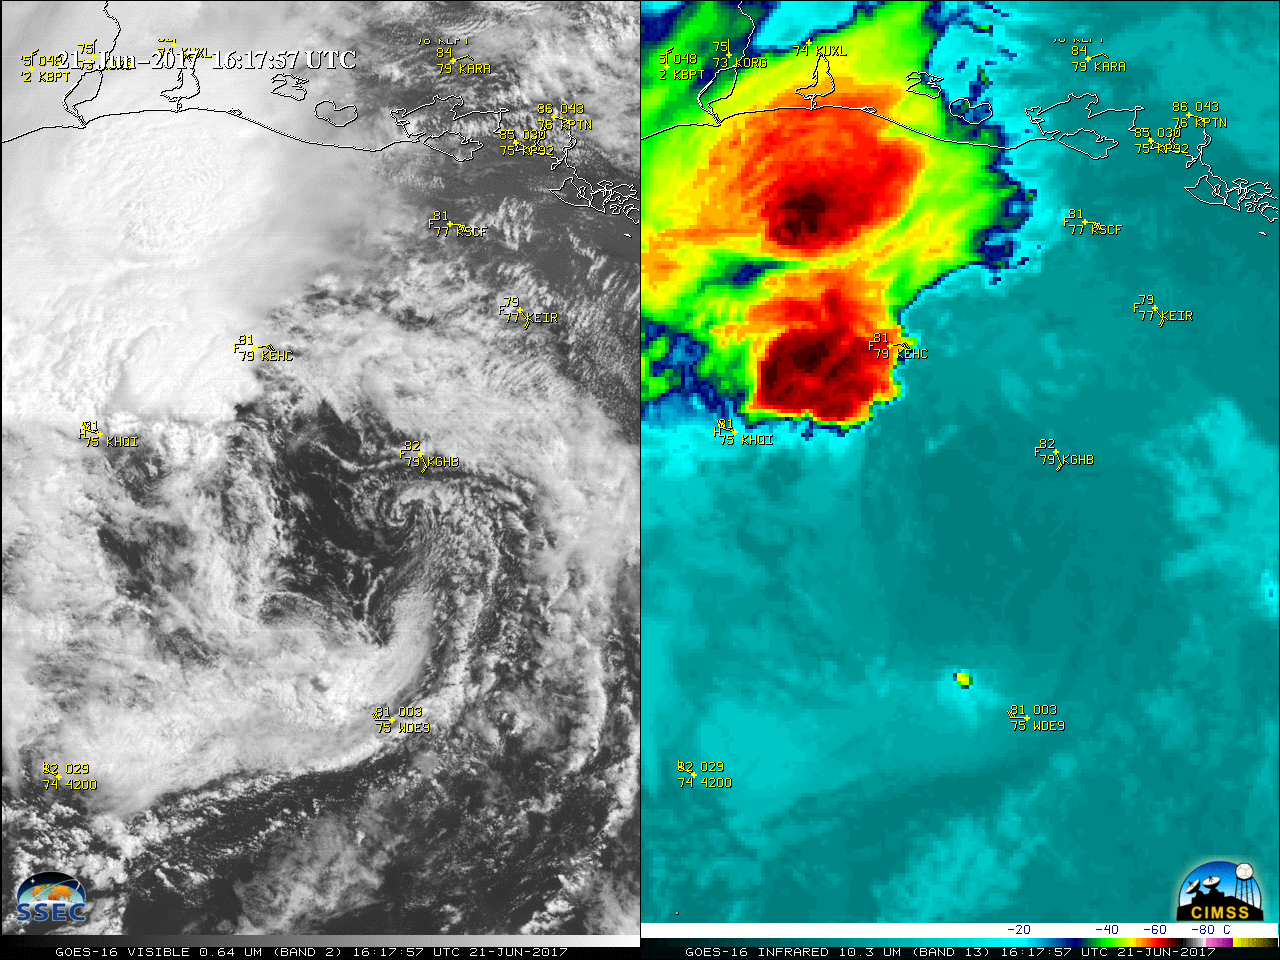 GOES-16 Visible (0.64 µm, left) and Infrared Window (10.3 µm, right) images, with hourly surface/buoy/ship reports plotted in yellow [click to play MP4 animation]